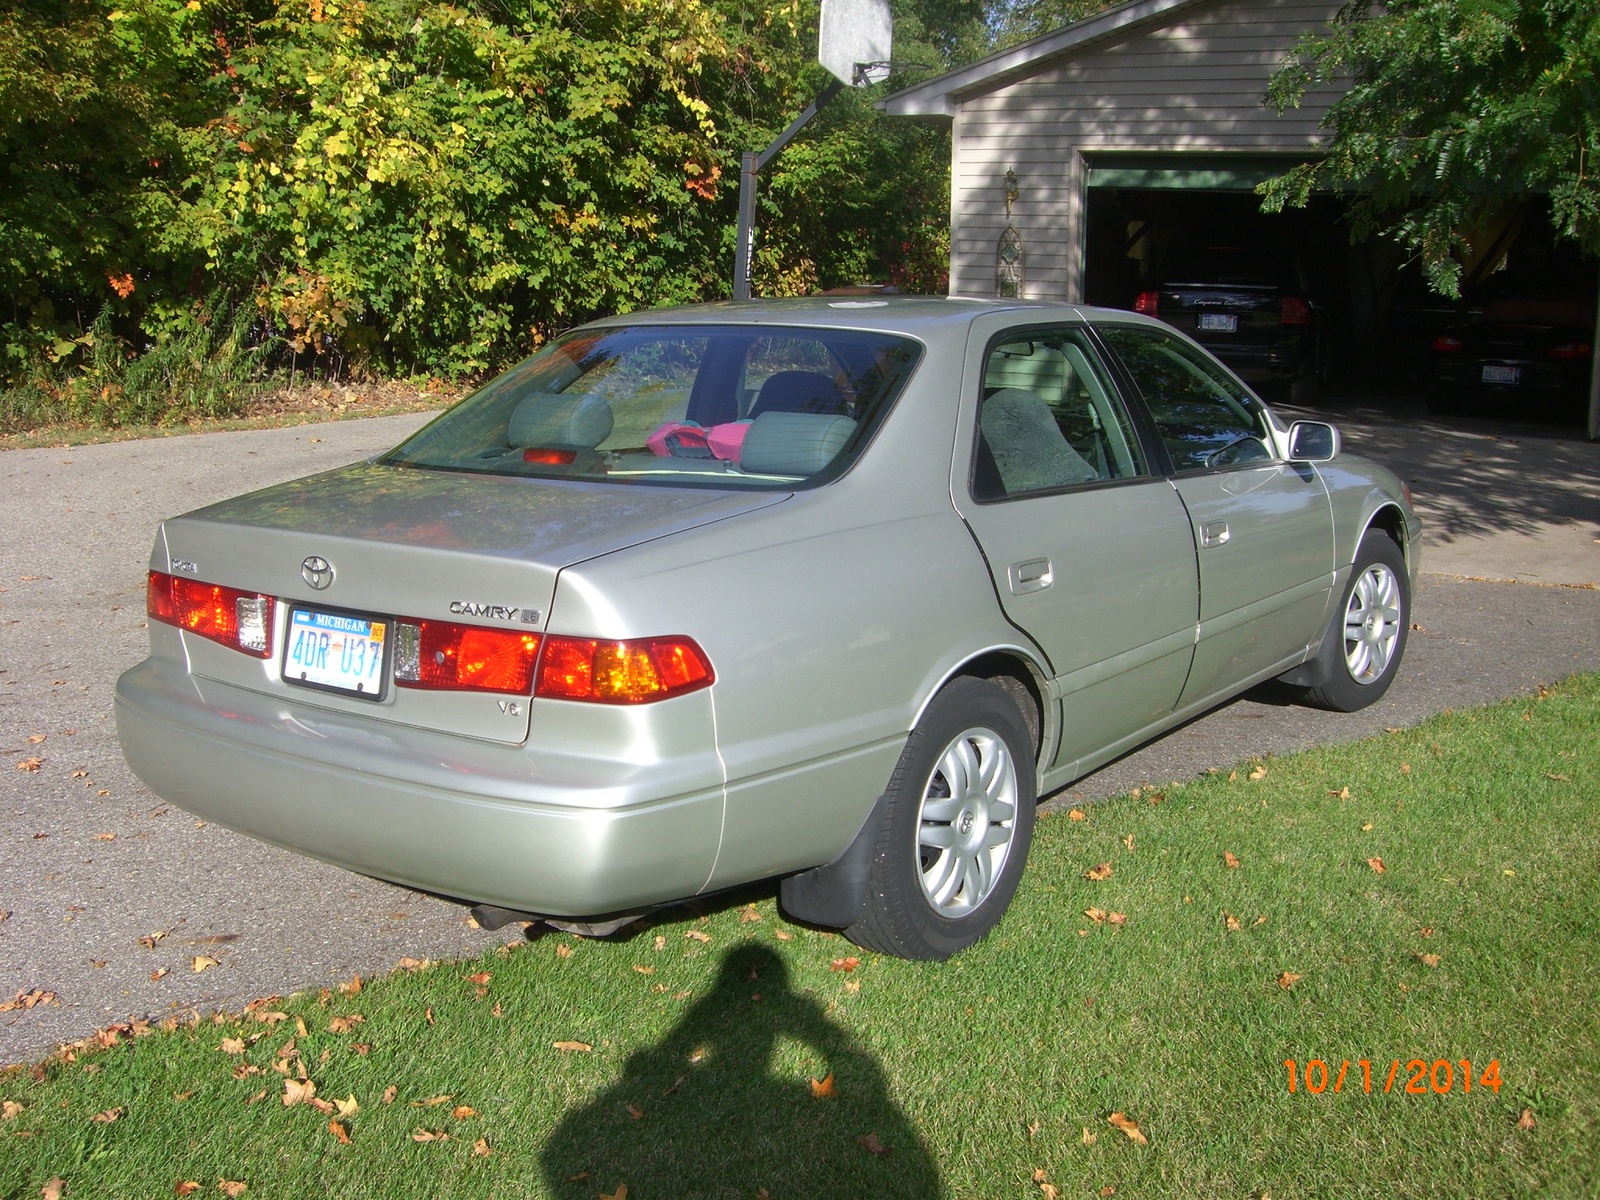 2000 Toyota Camry Overview CarGurus. 